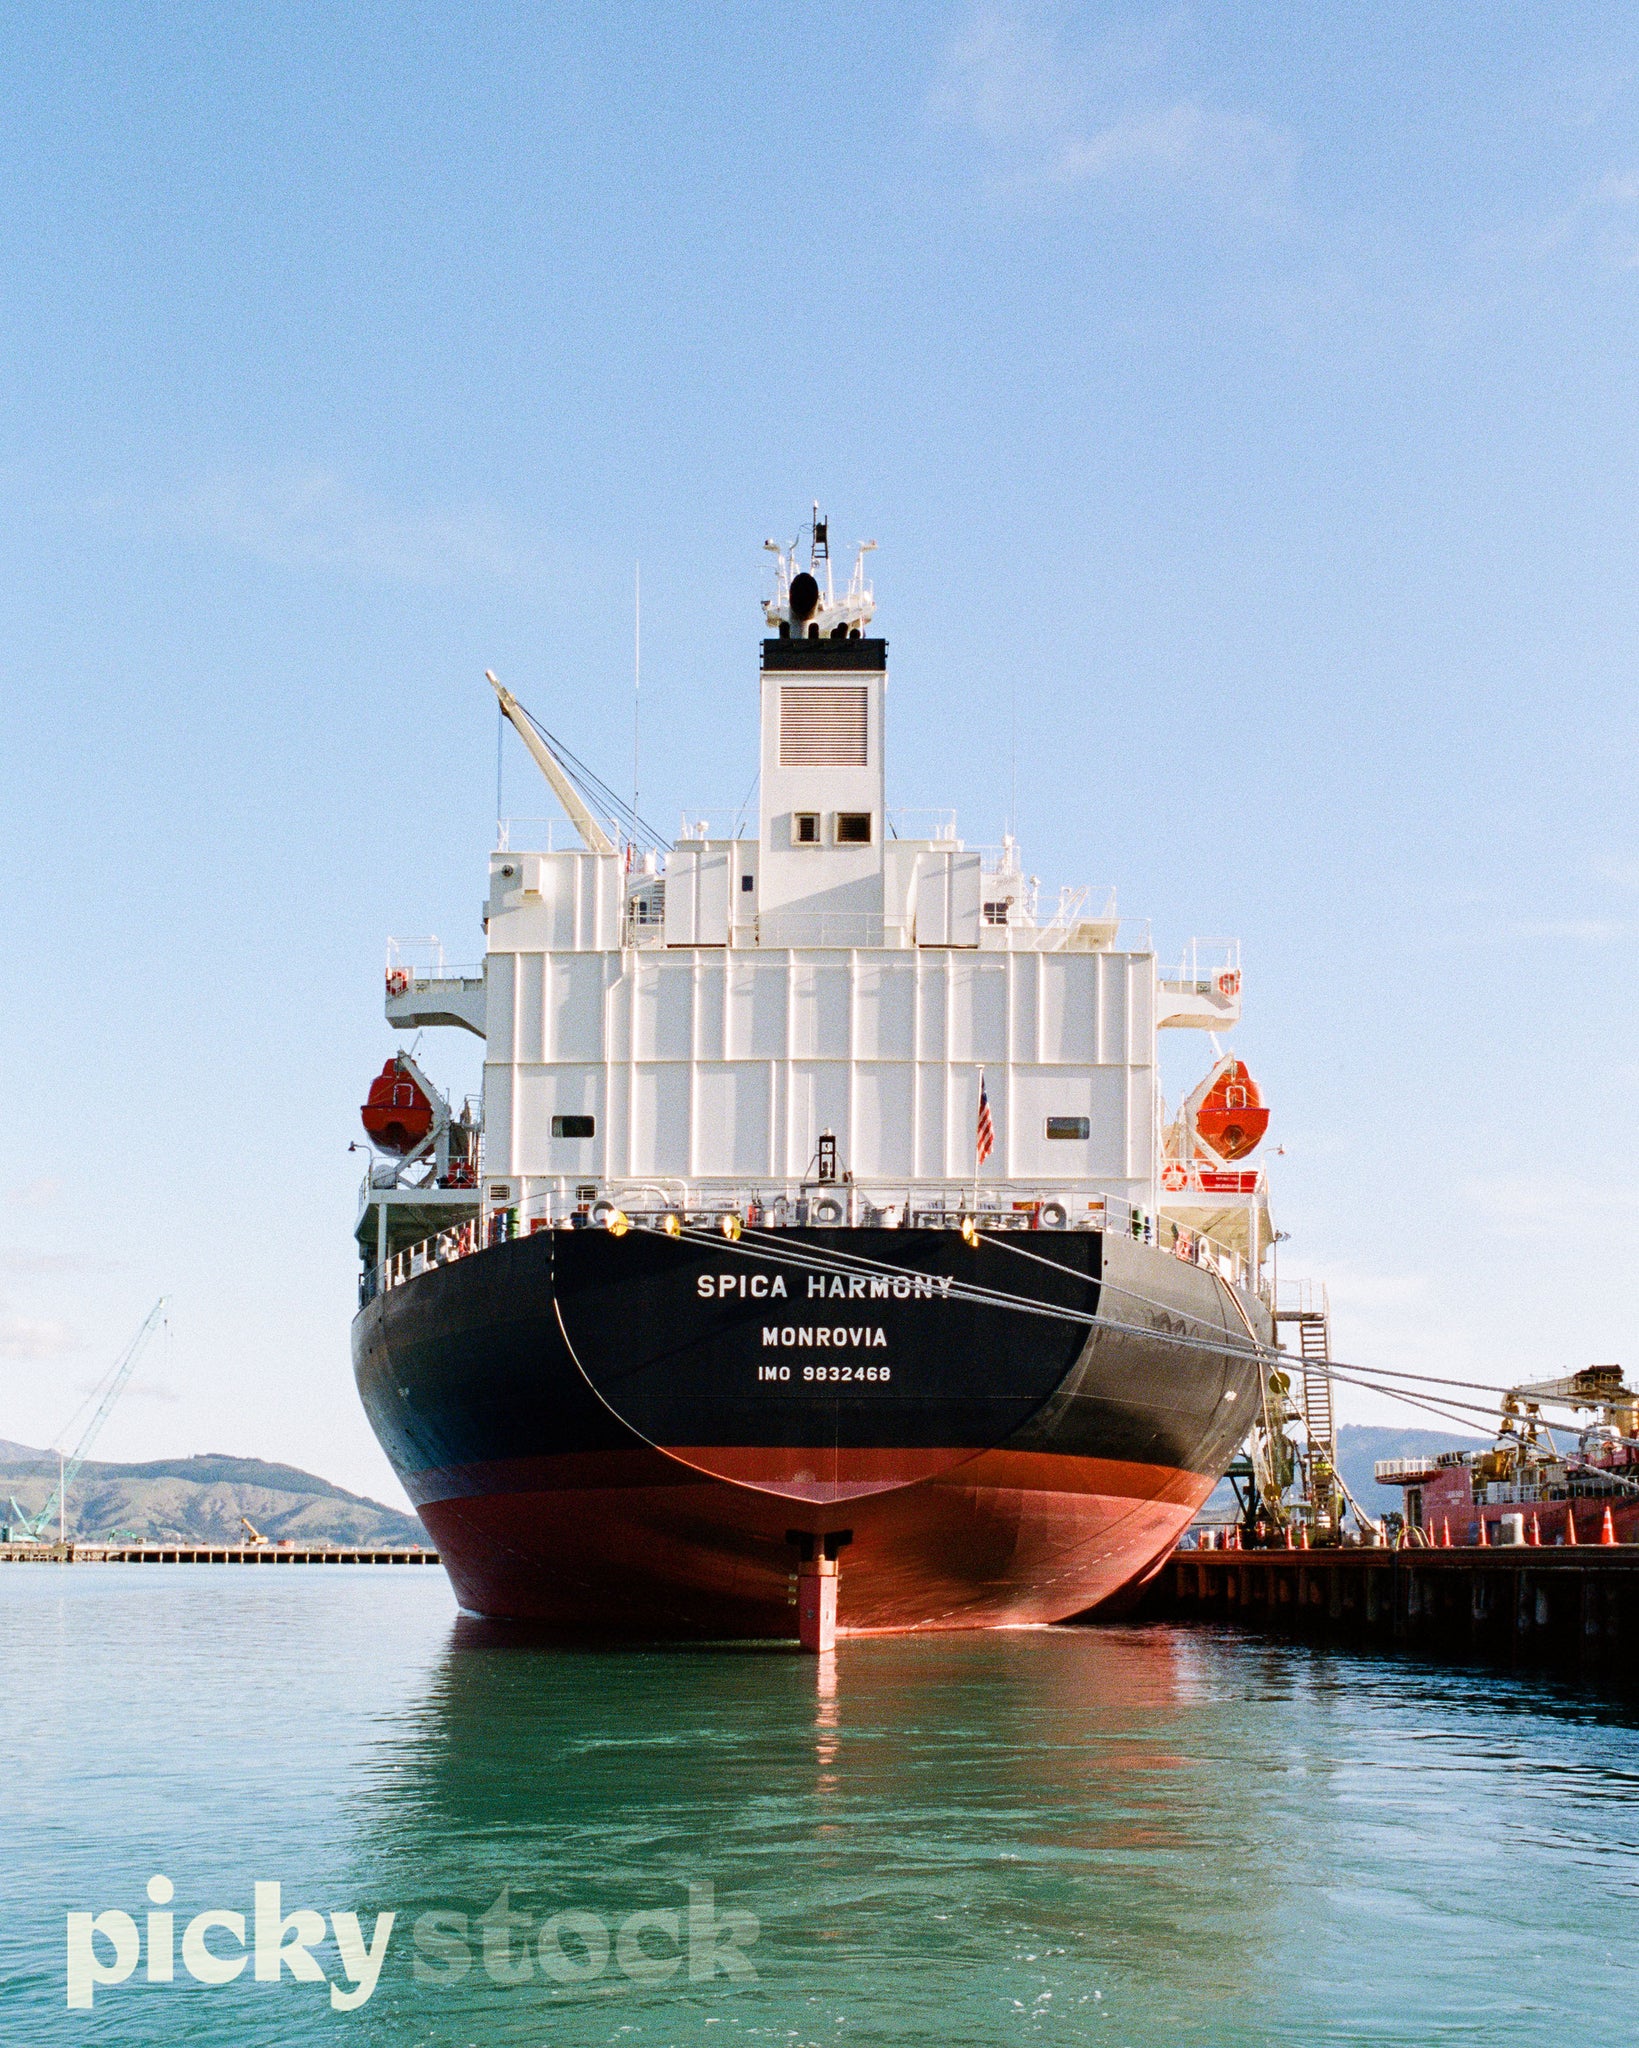 Portrait image of a large container ship docked at a port. Line holding boat to wharf. Wharf is to the right side of image. Container boat is has a red and black base with a white body and viewing platform. Sky is blue water is a turquoise green.